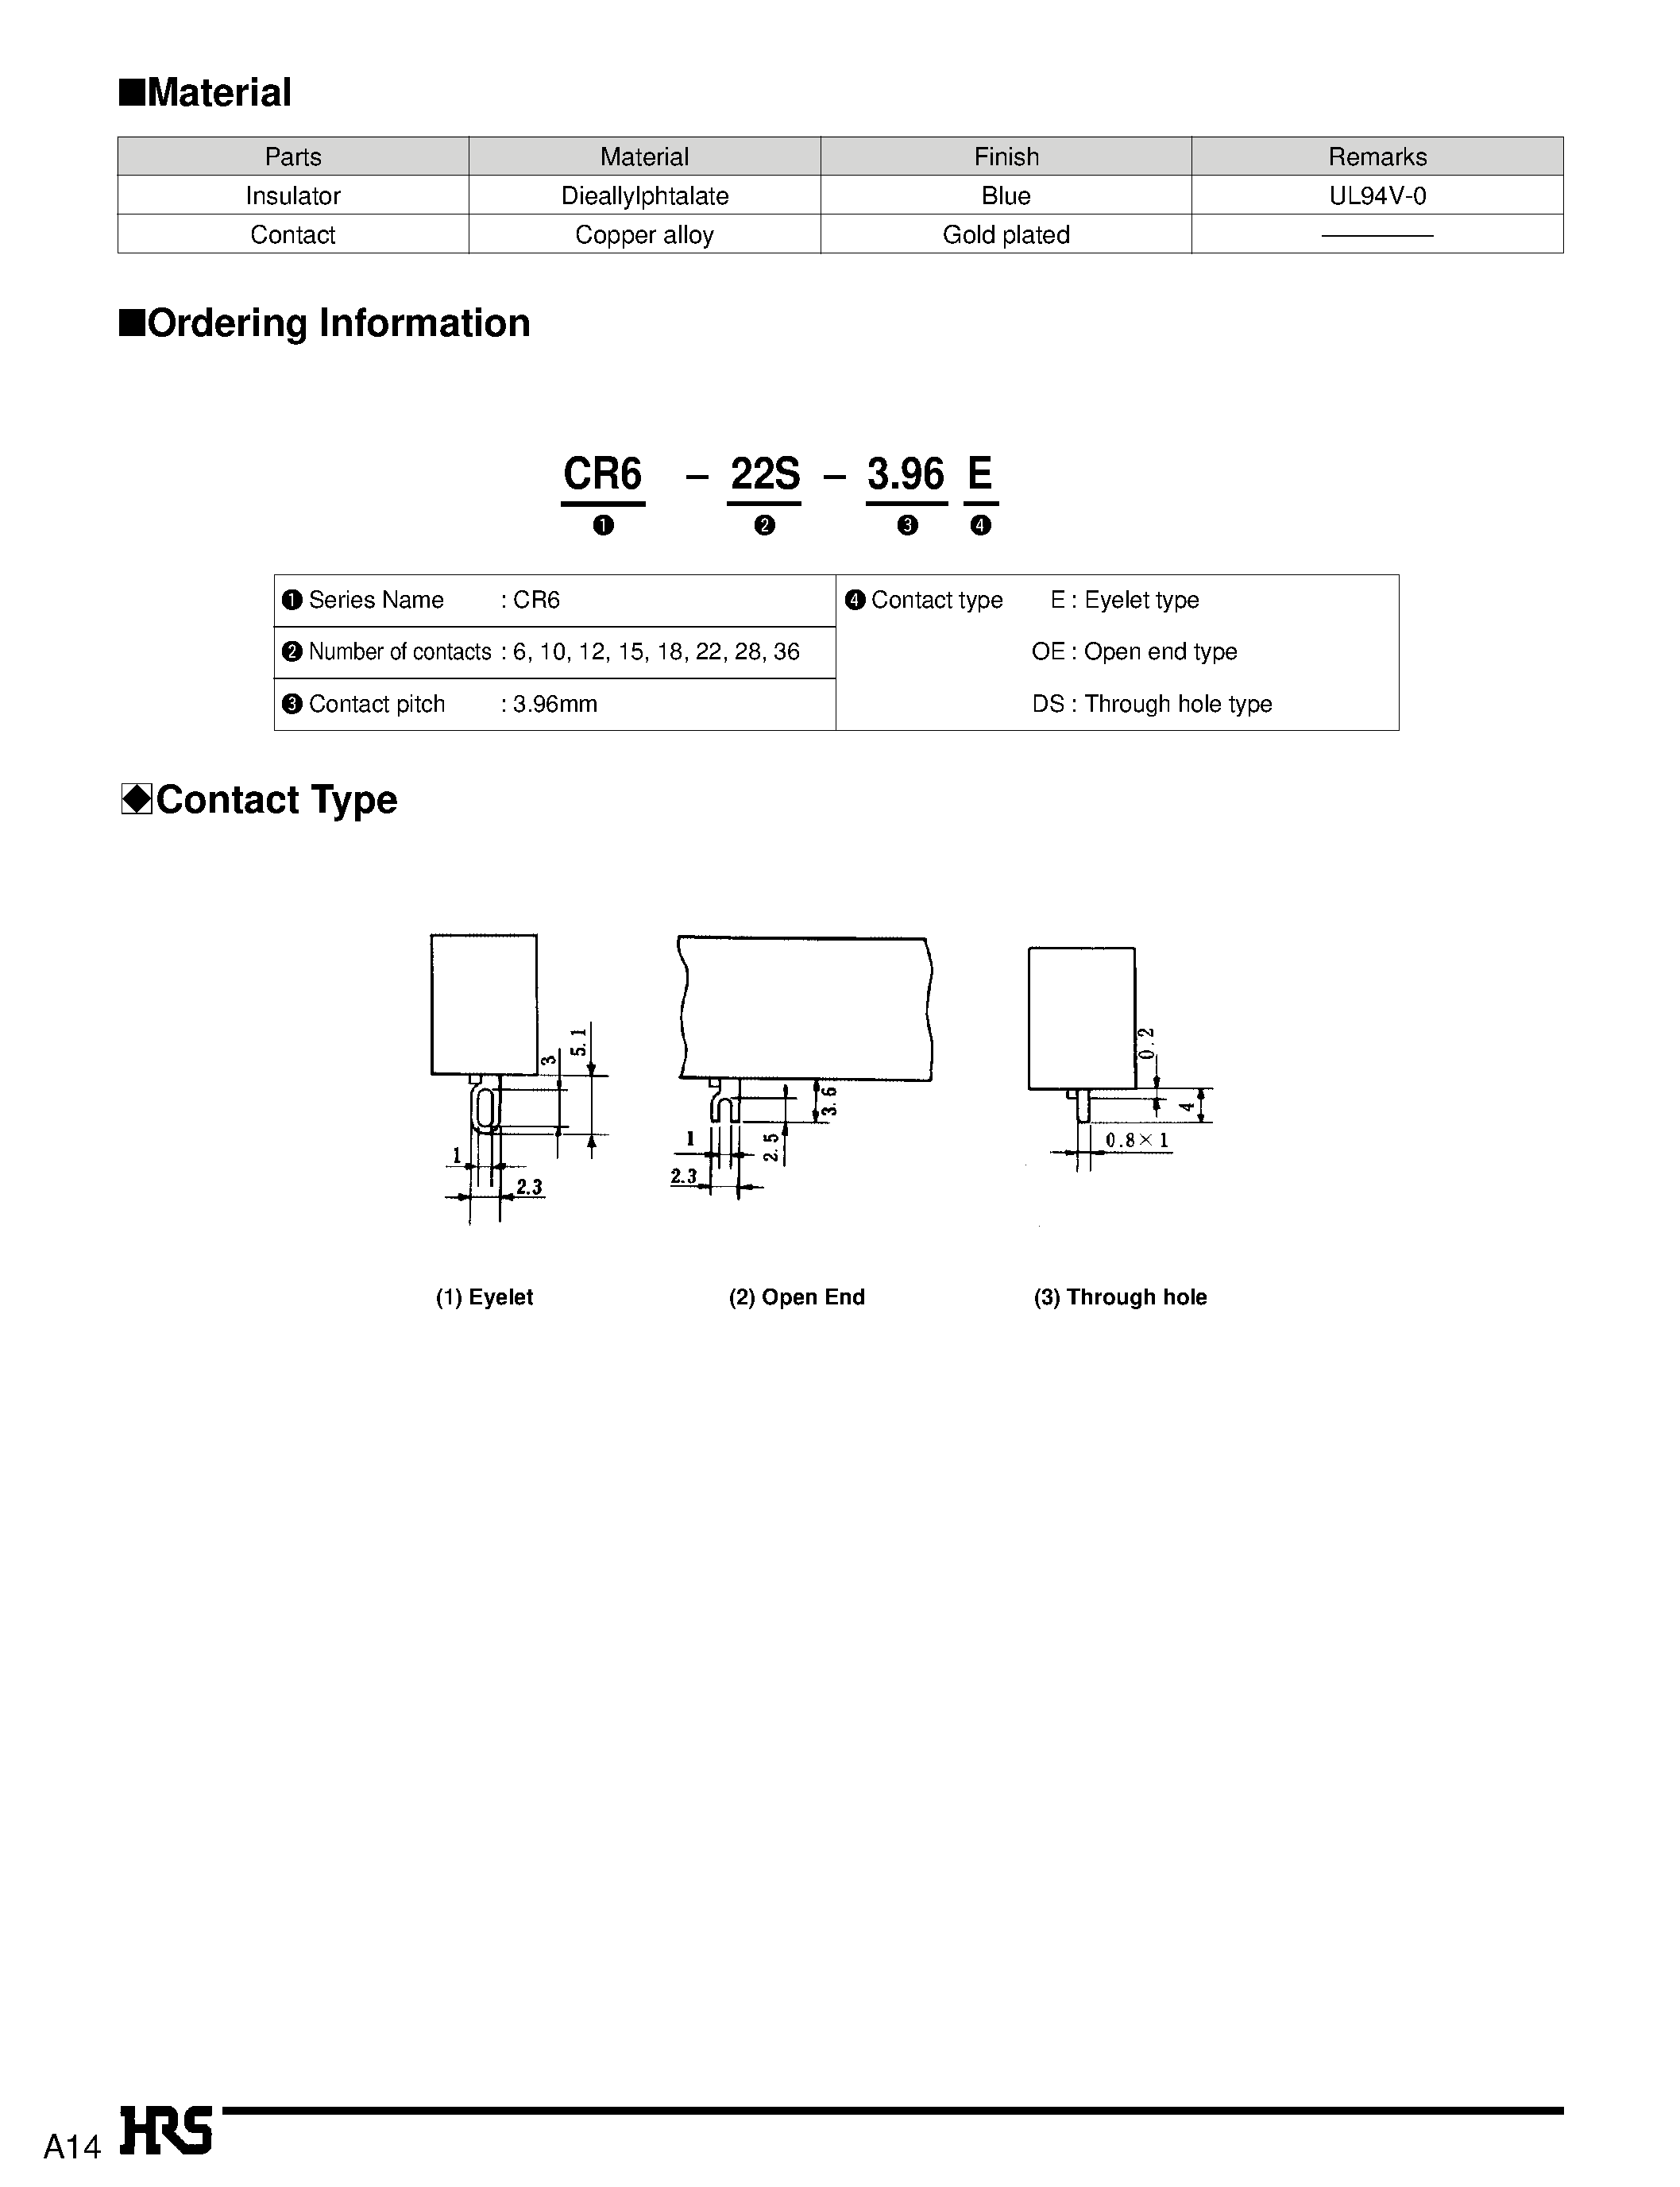 Datasheet CR6-22S-3.96E - 3.96mm Pitch Card Edge Connector page 2